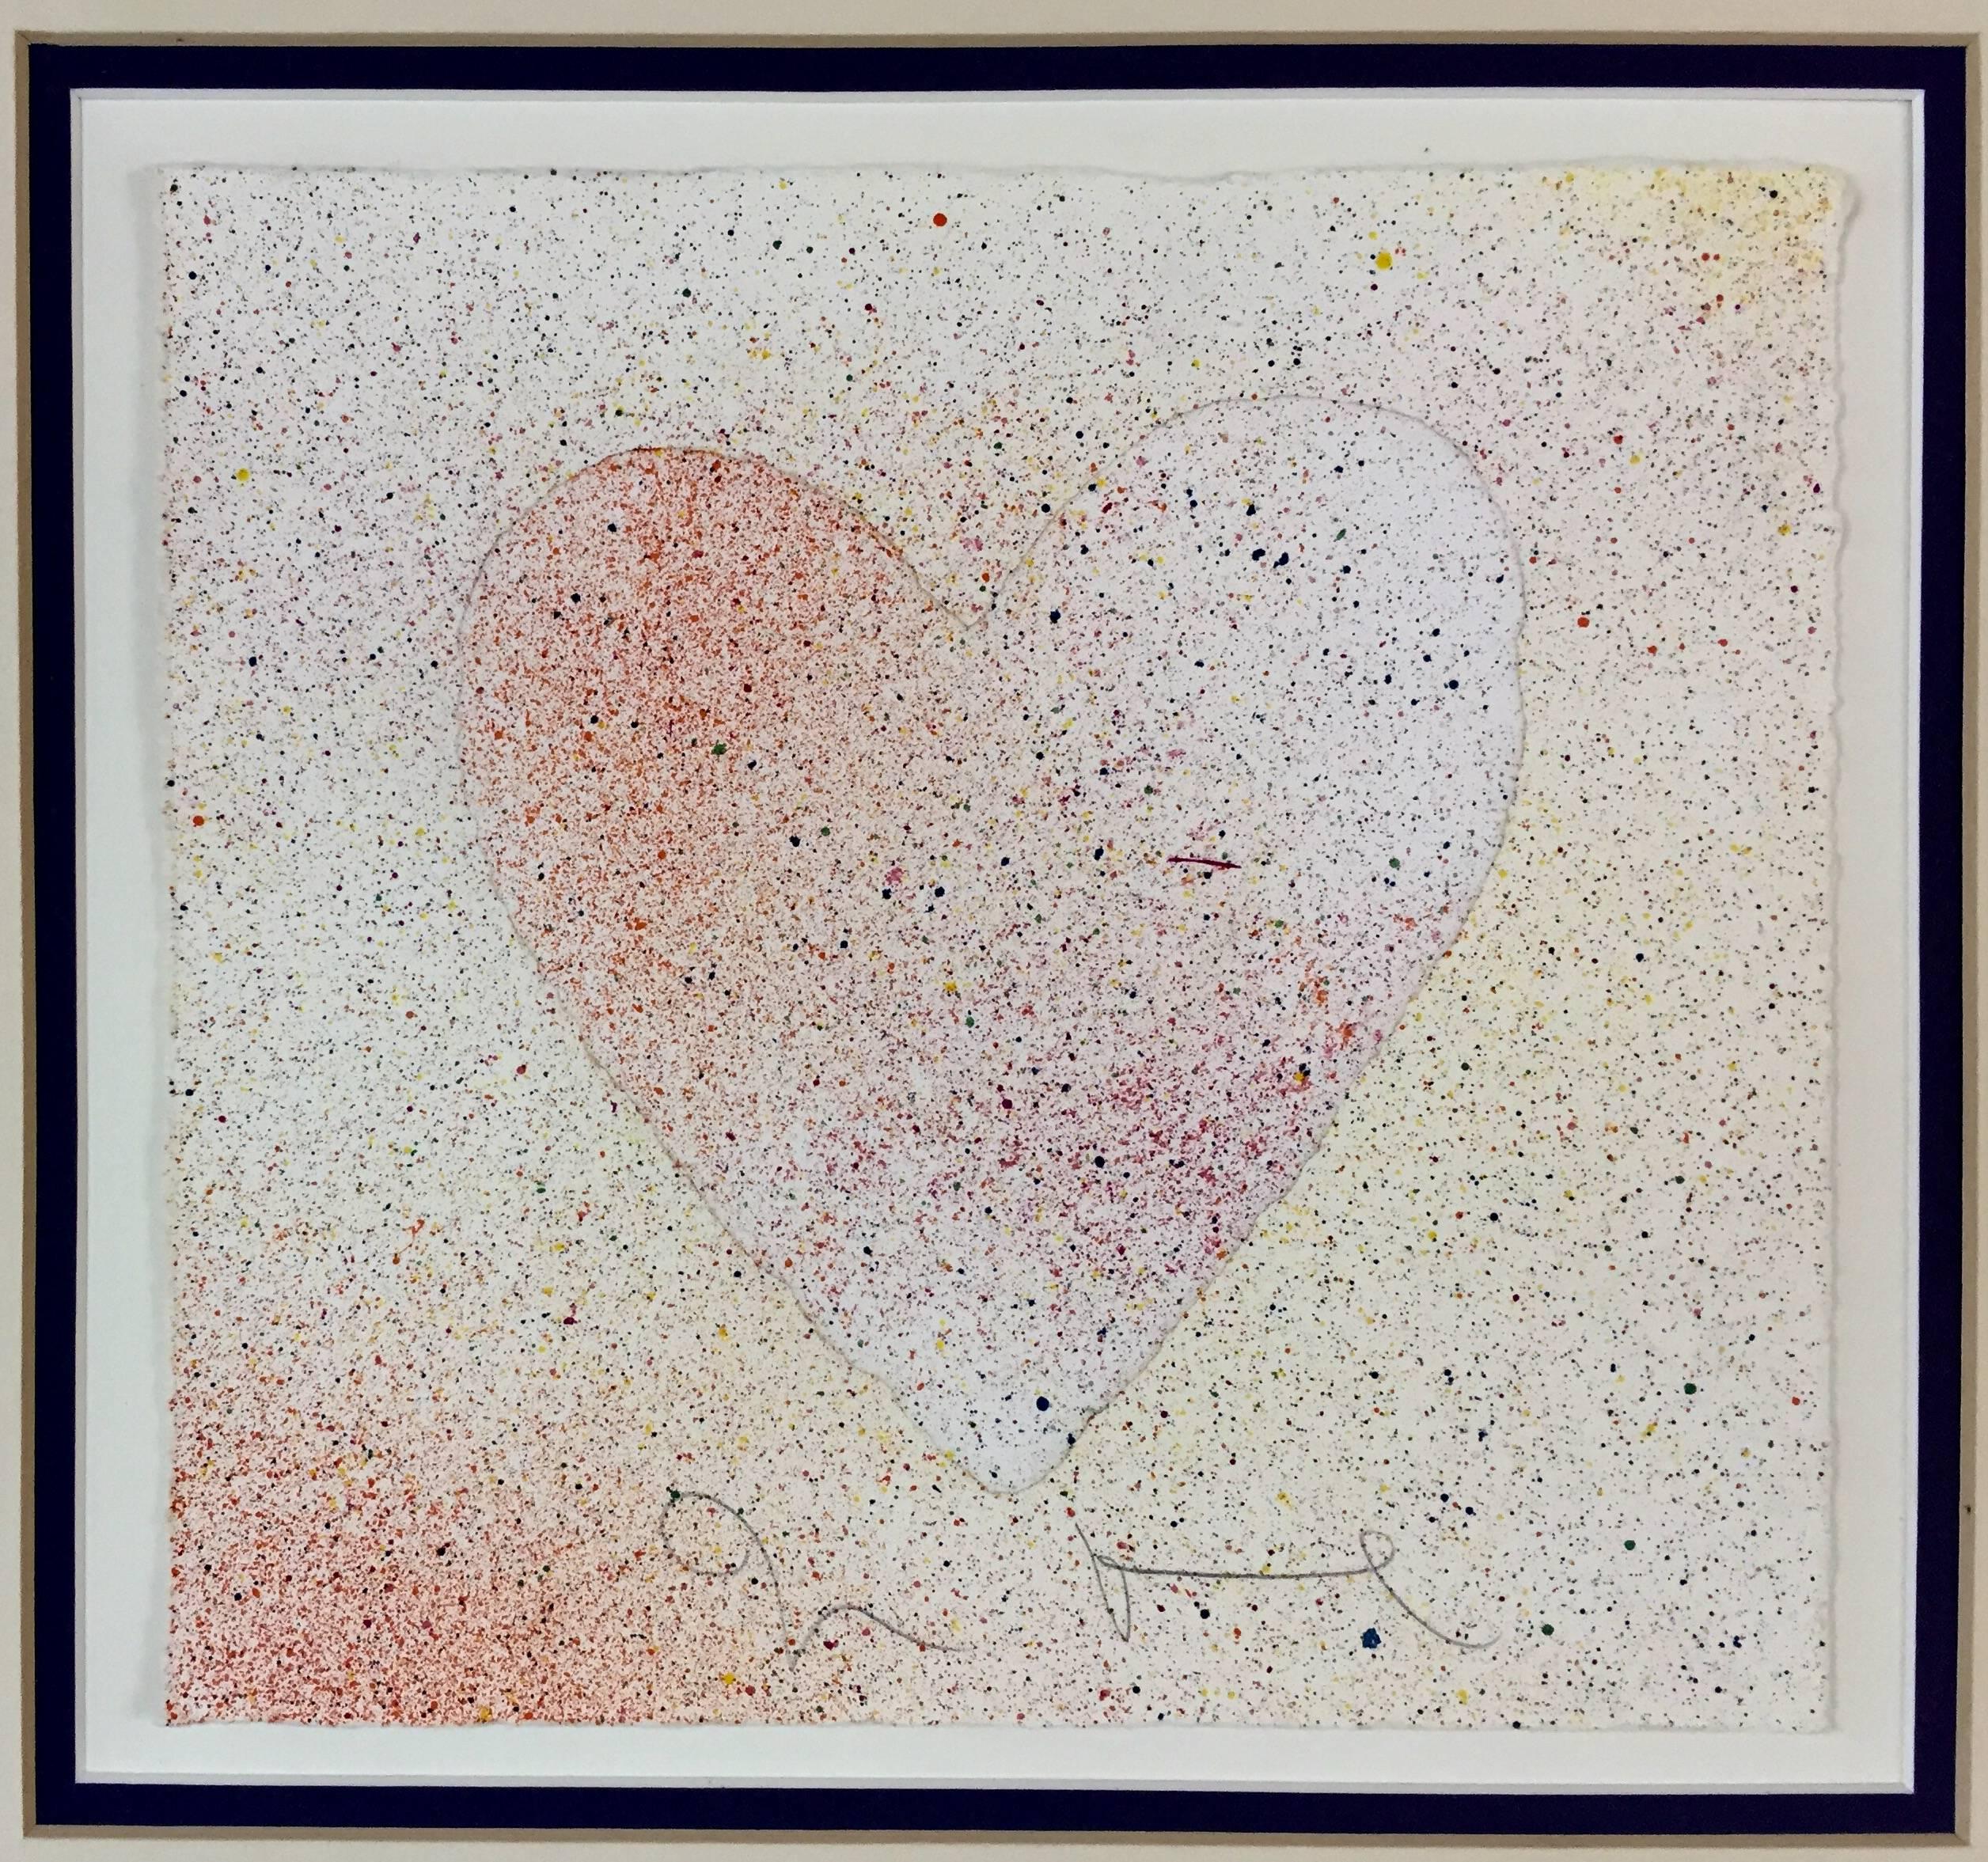 "Untitled" - Mixed Media Art by Jim Dine